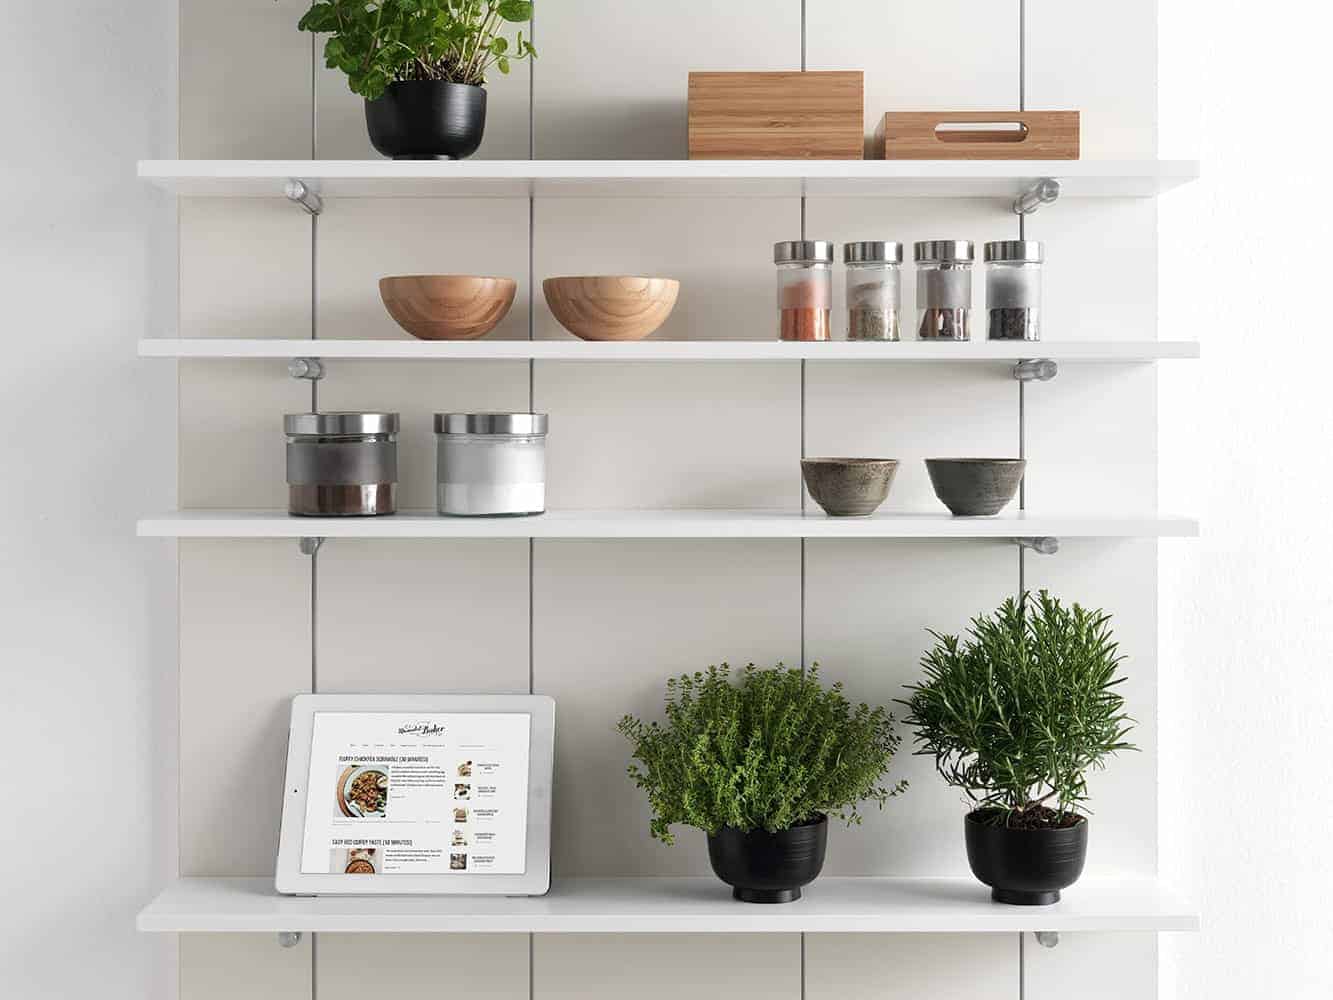 Salice Pin shelf with decor elements such as indoors planters, books, bowls, frame